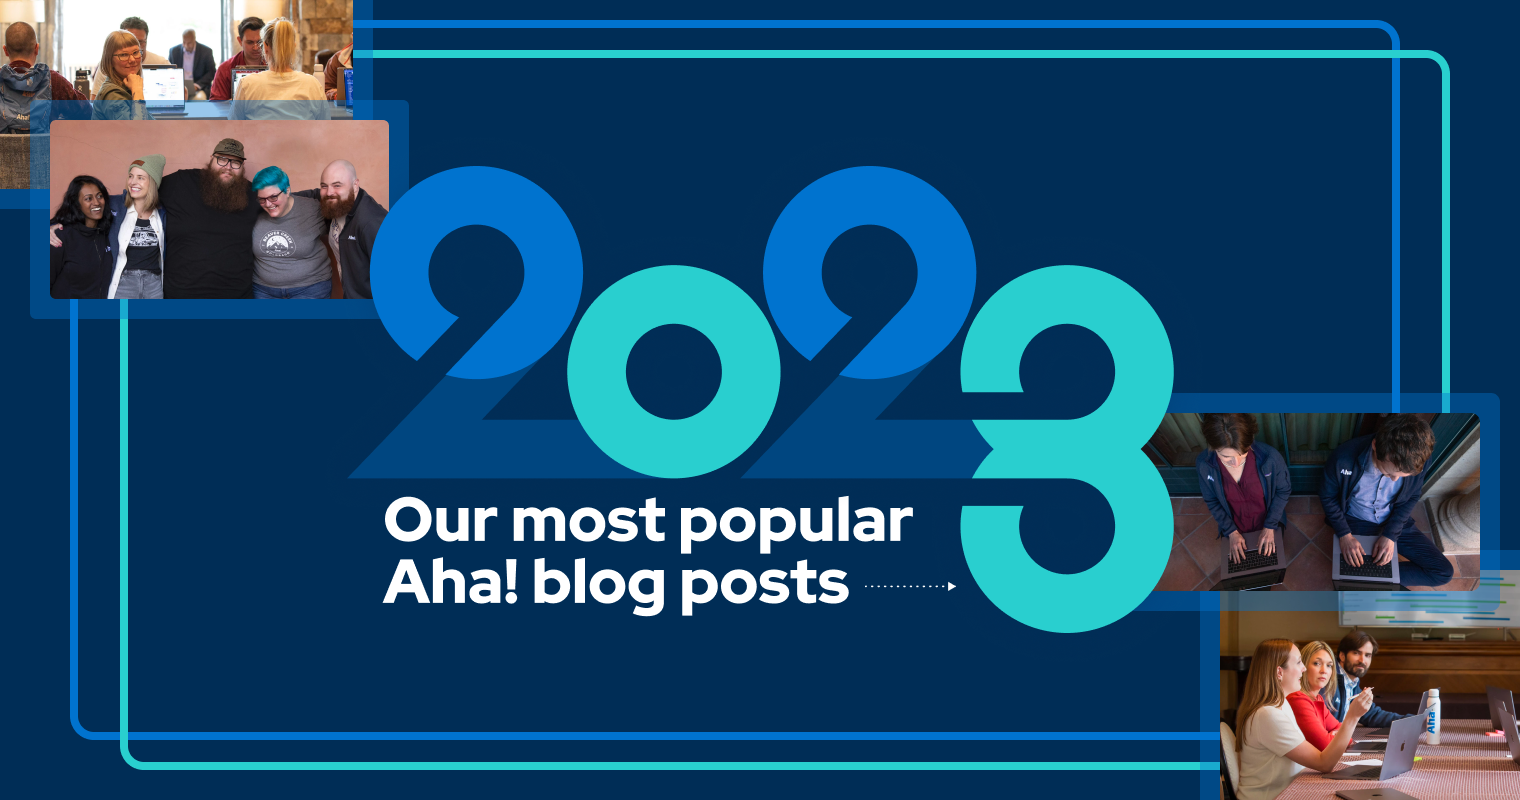 16 top stories on the Aha! blog this year